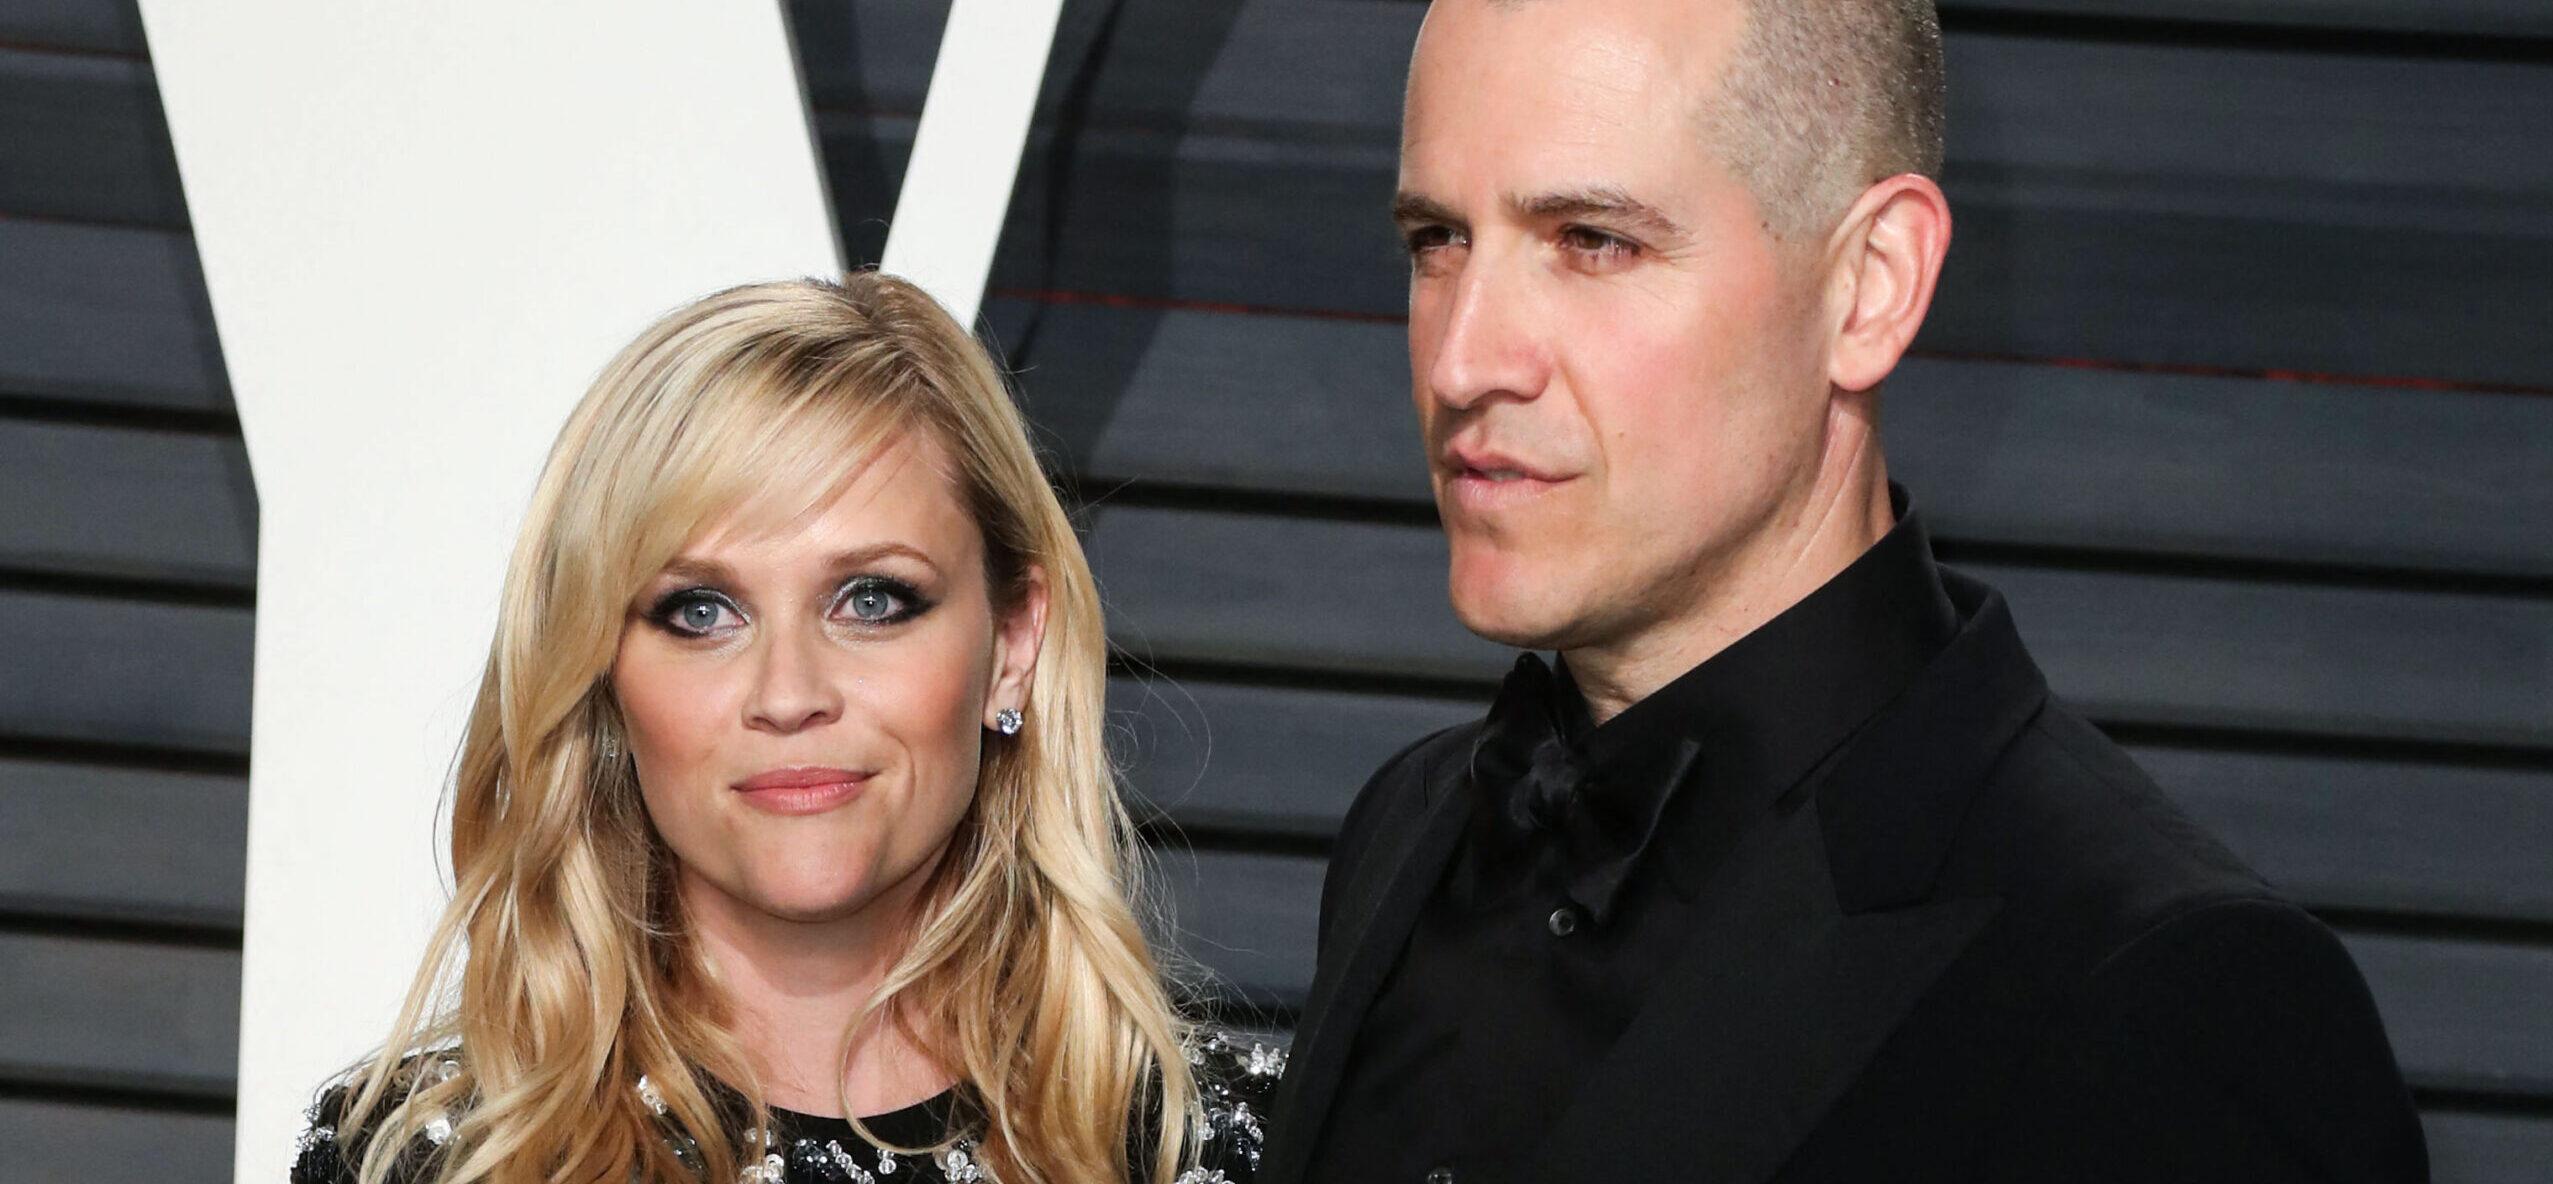 Reese Witherspoon Agrees To Joint Custody, No Spousal Support In Divorce Settlement